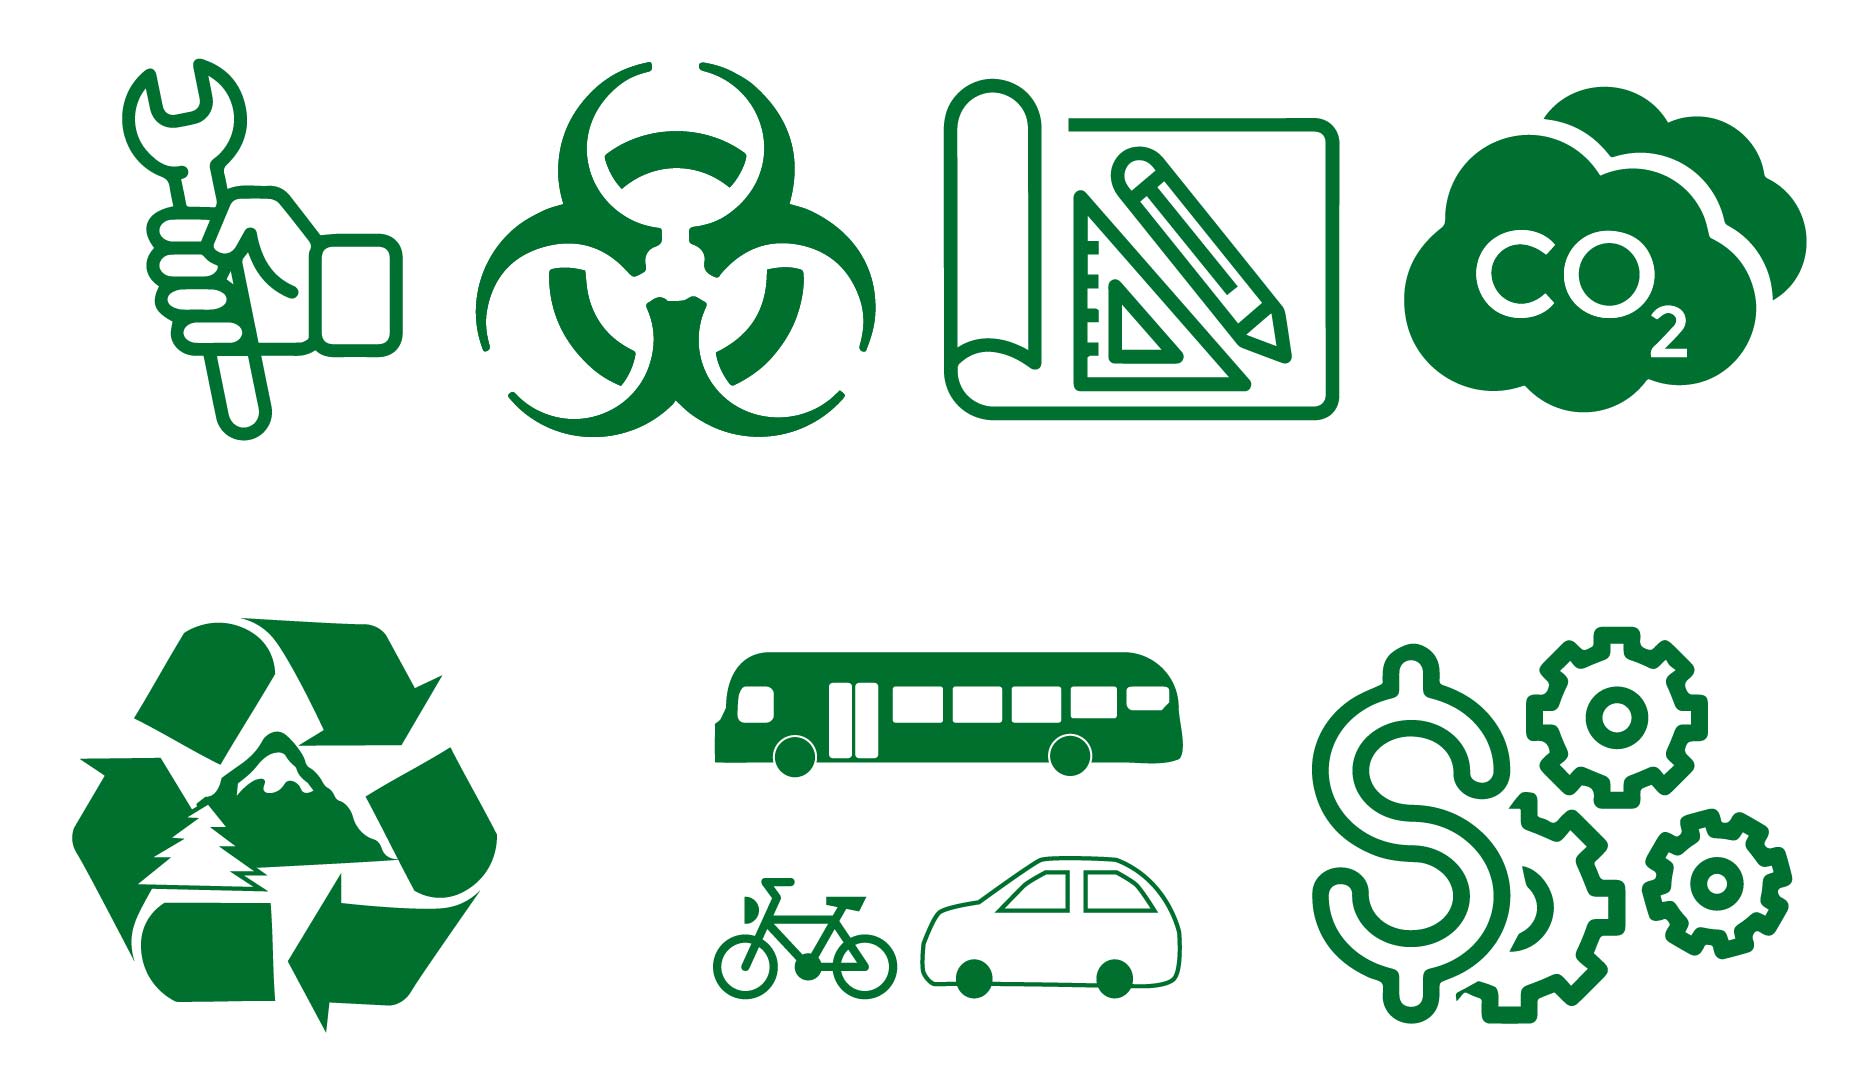 Symbols for sustainability planning topics, such as a bus, a wrench, and a recycling symbol